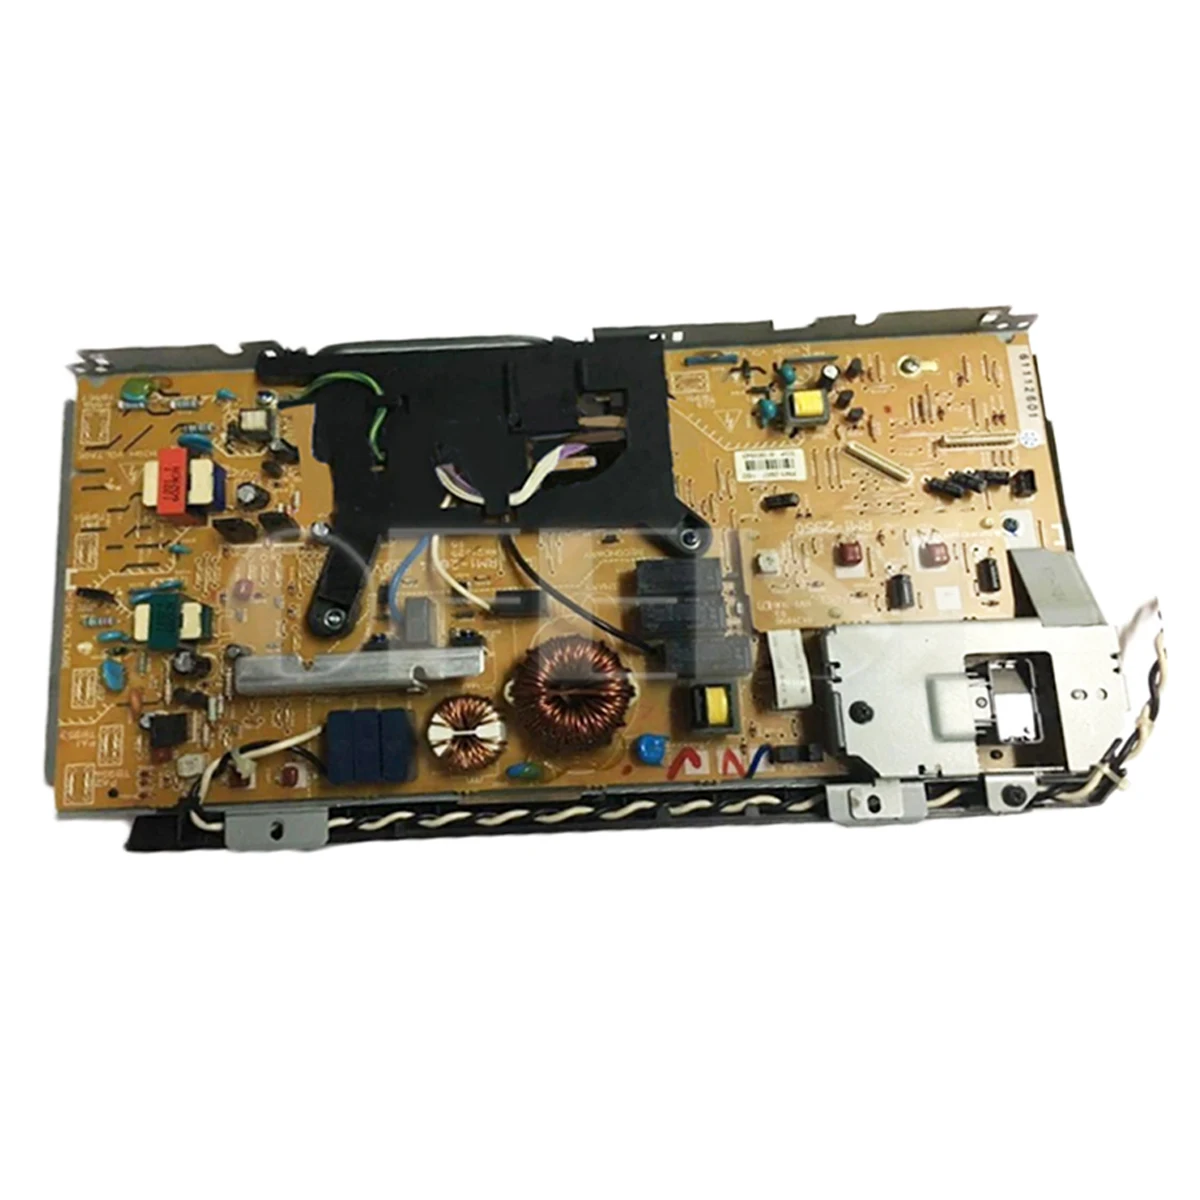 

Original for HP5200 5200LX 5200n High Voltage power supply PC board RM1-2957-010 RM1-2957 RM1-2958 Printer parts on sale